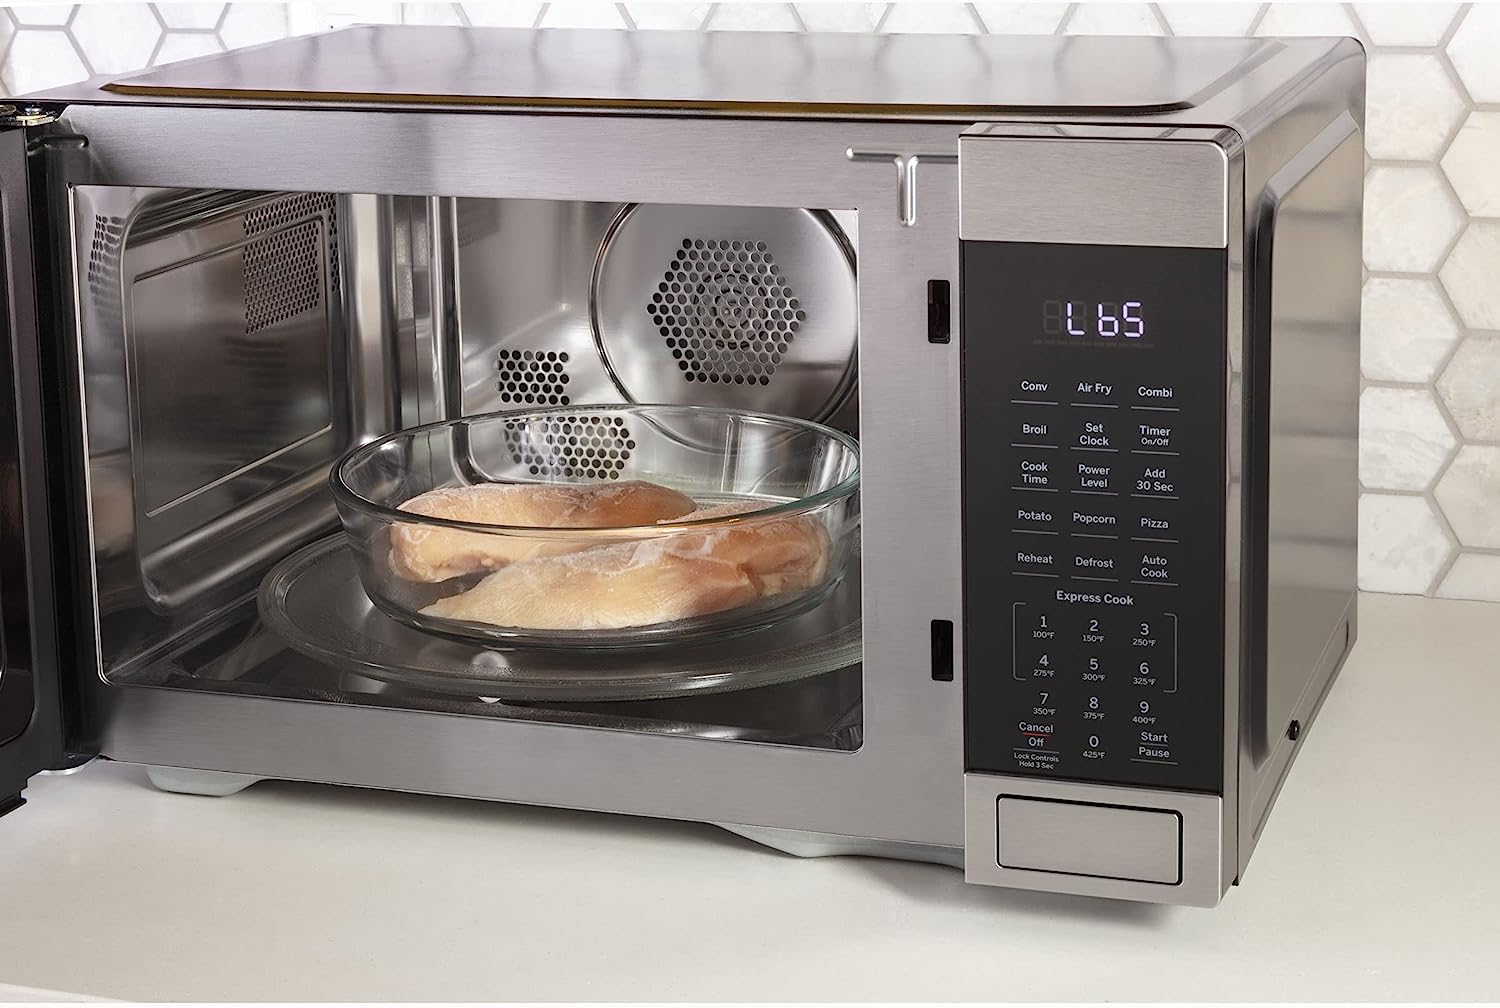 https://bigbigmart.com/wp-content/uploads/2023/07/GE-3-in-1-Countertop-Microwave-Oven-Complete-With-Air-Fryer-Broiler-Convection-Mode-1.0-Cubic-Feet-Capacity-1050-Watts-Kitchen-Essentials-for-the-Countertop-or-Dorm-Room-Stainless-Steel10.jpg